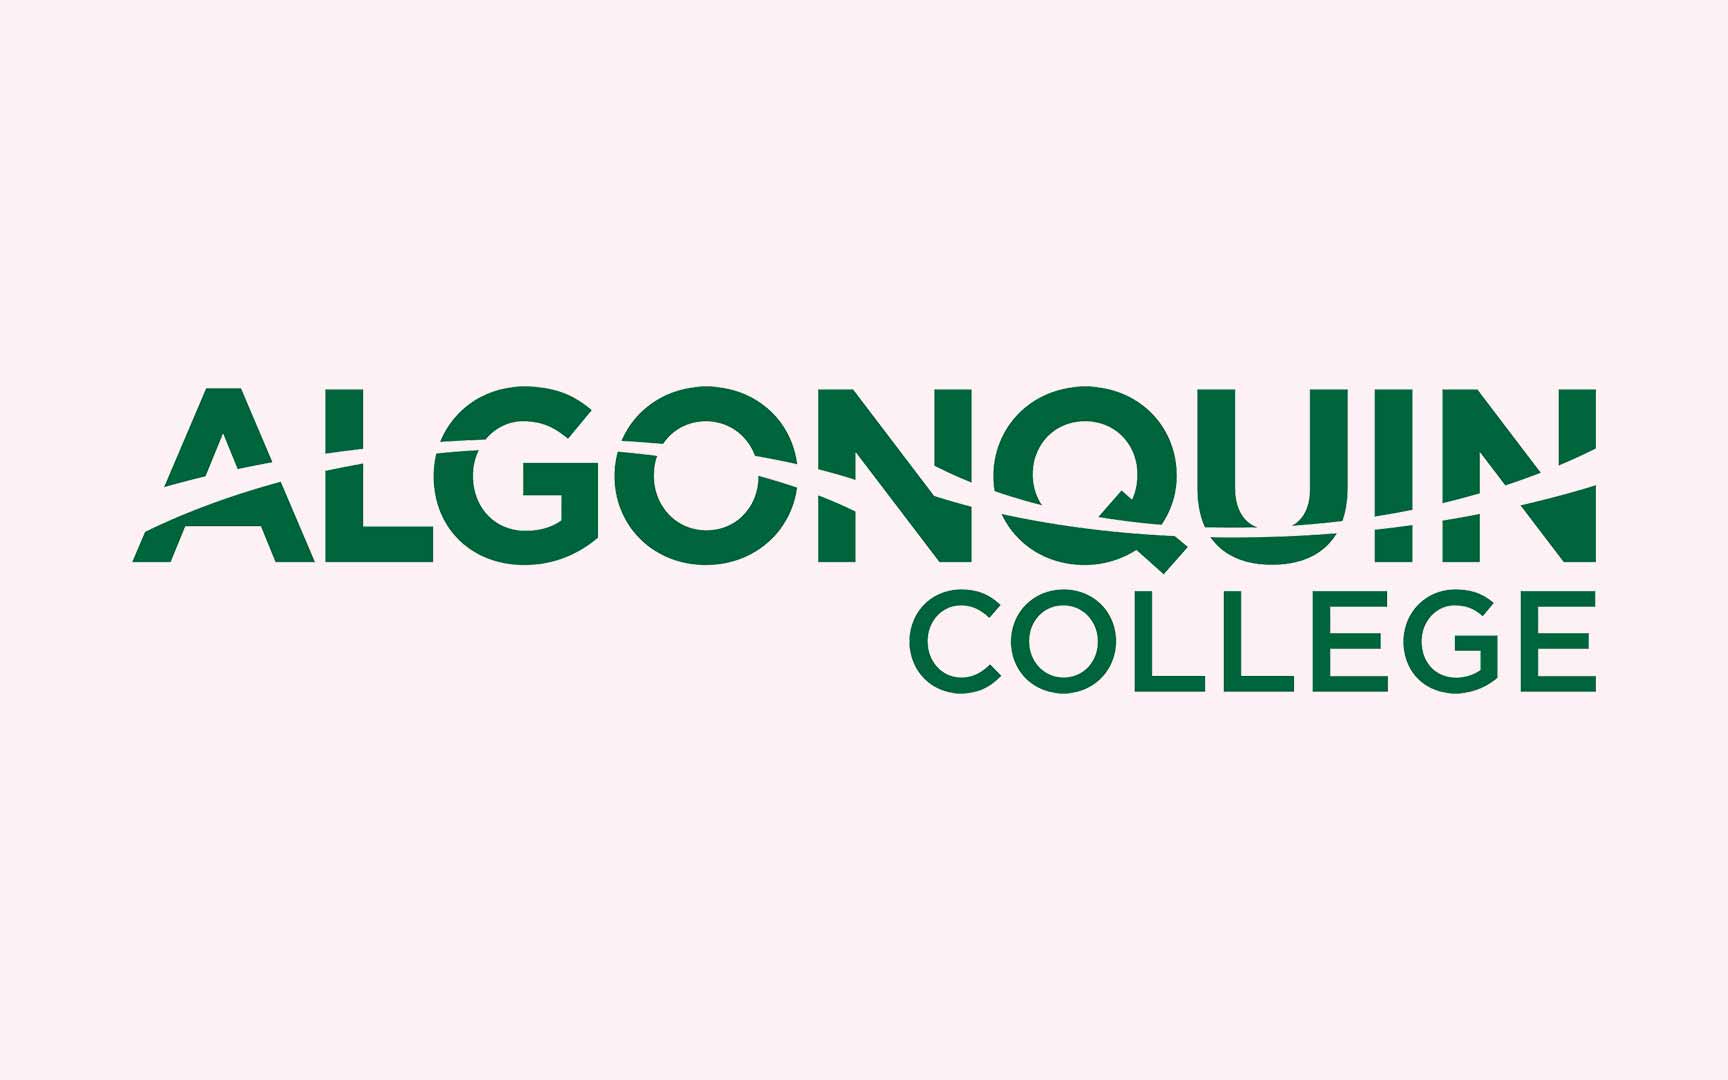 algonquin-college-selects-unit4-student-management-to-provide-a-modernized-student-experience